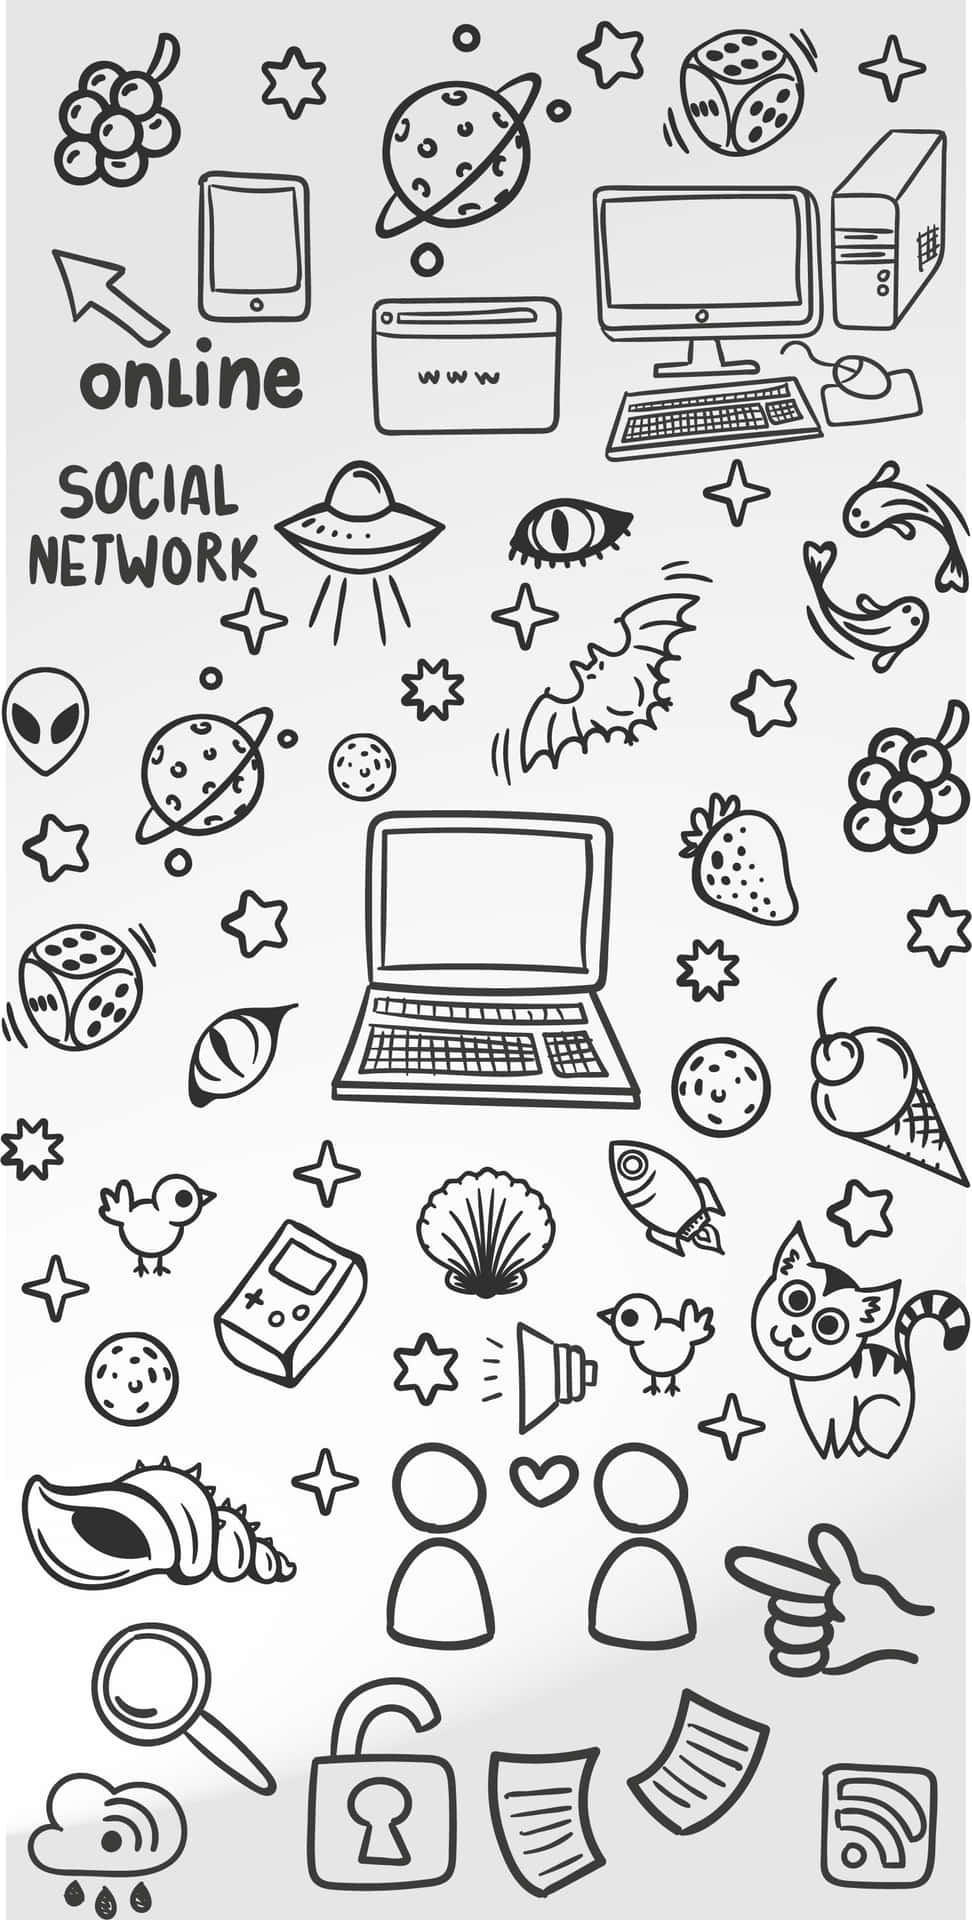 A Set Of Doodles Of Online Social Network Icons